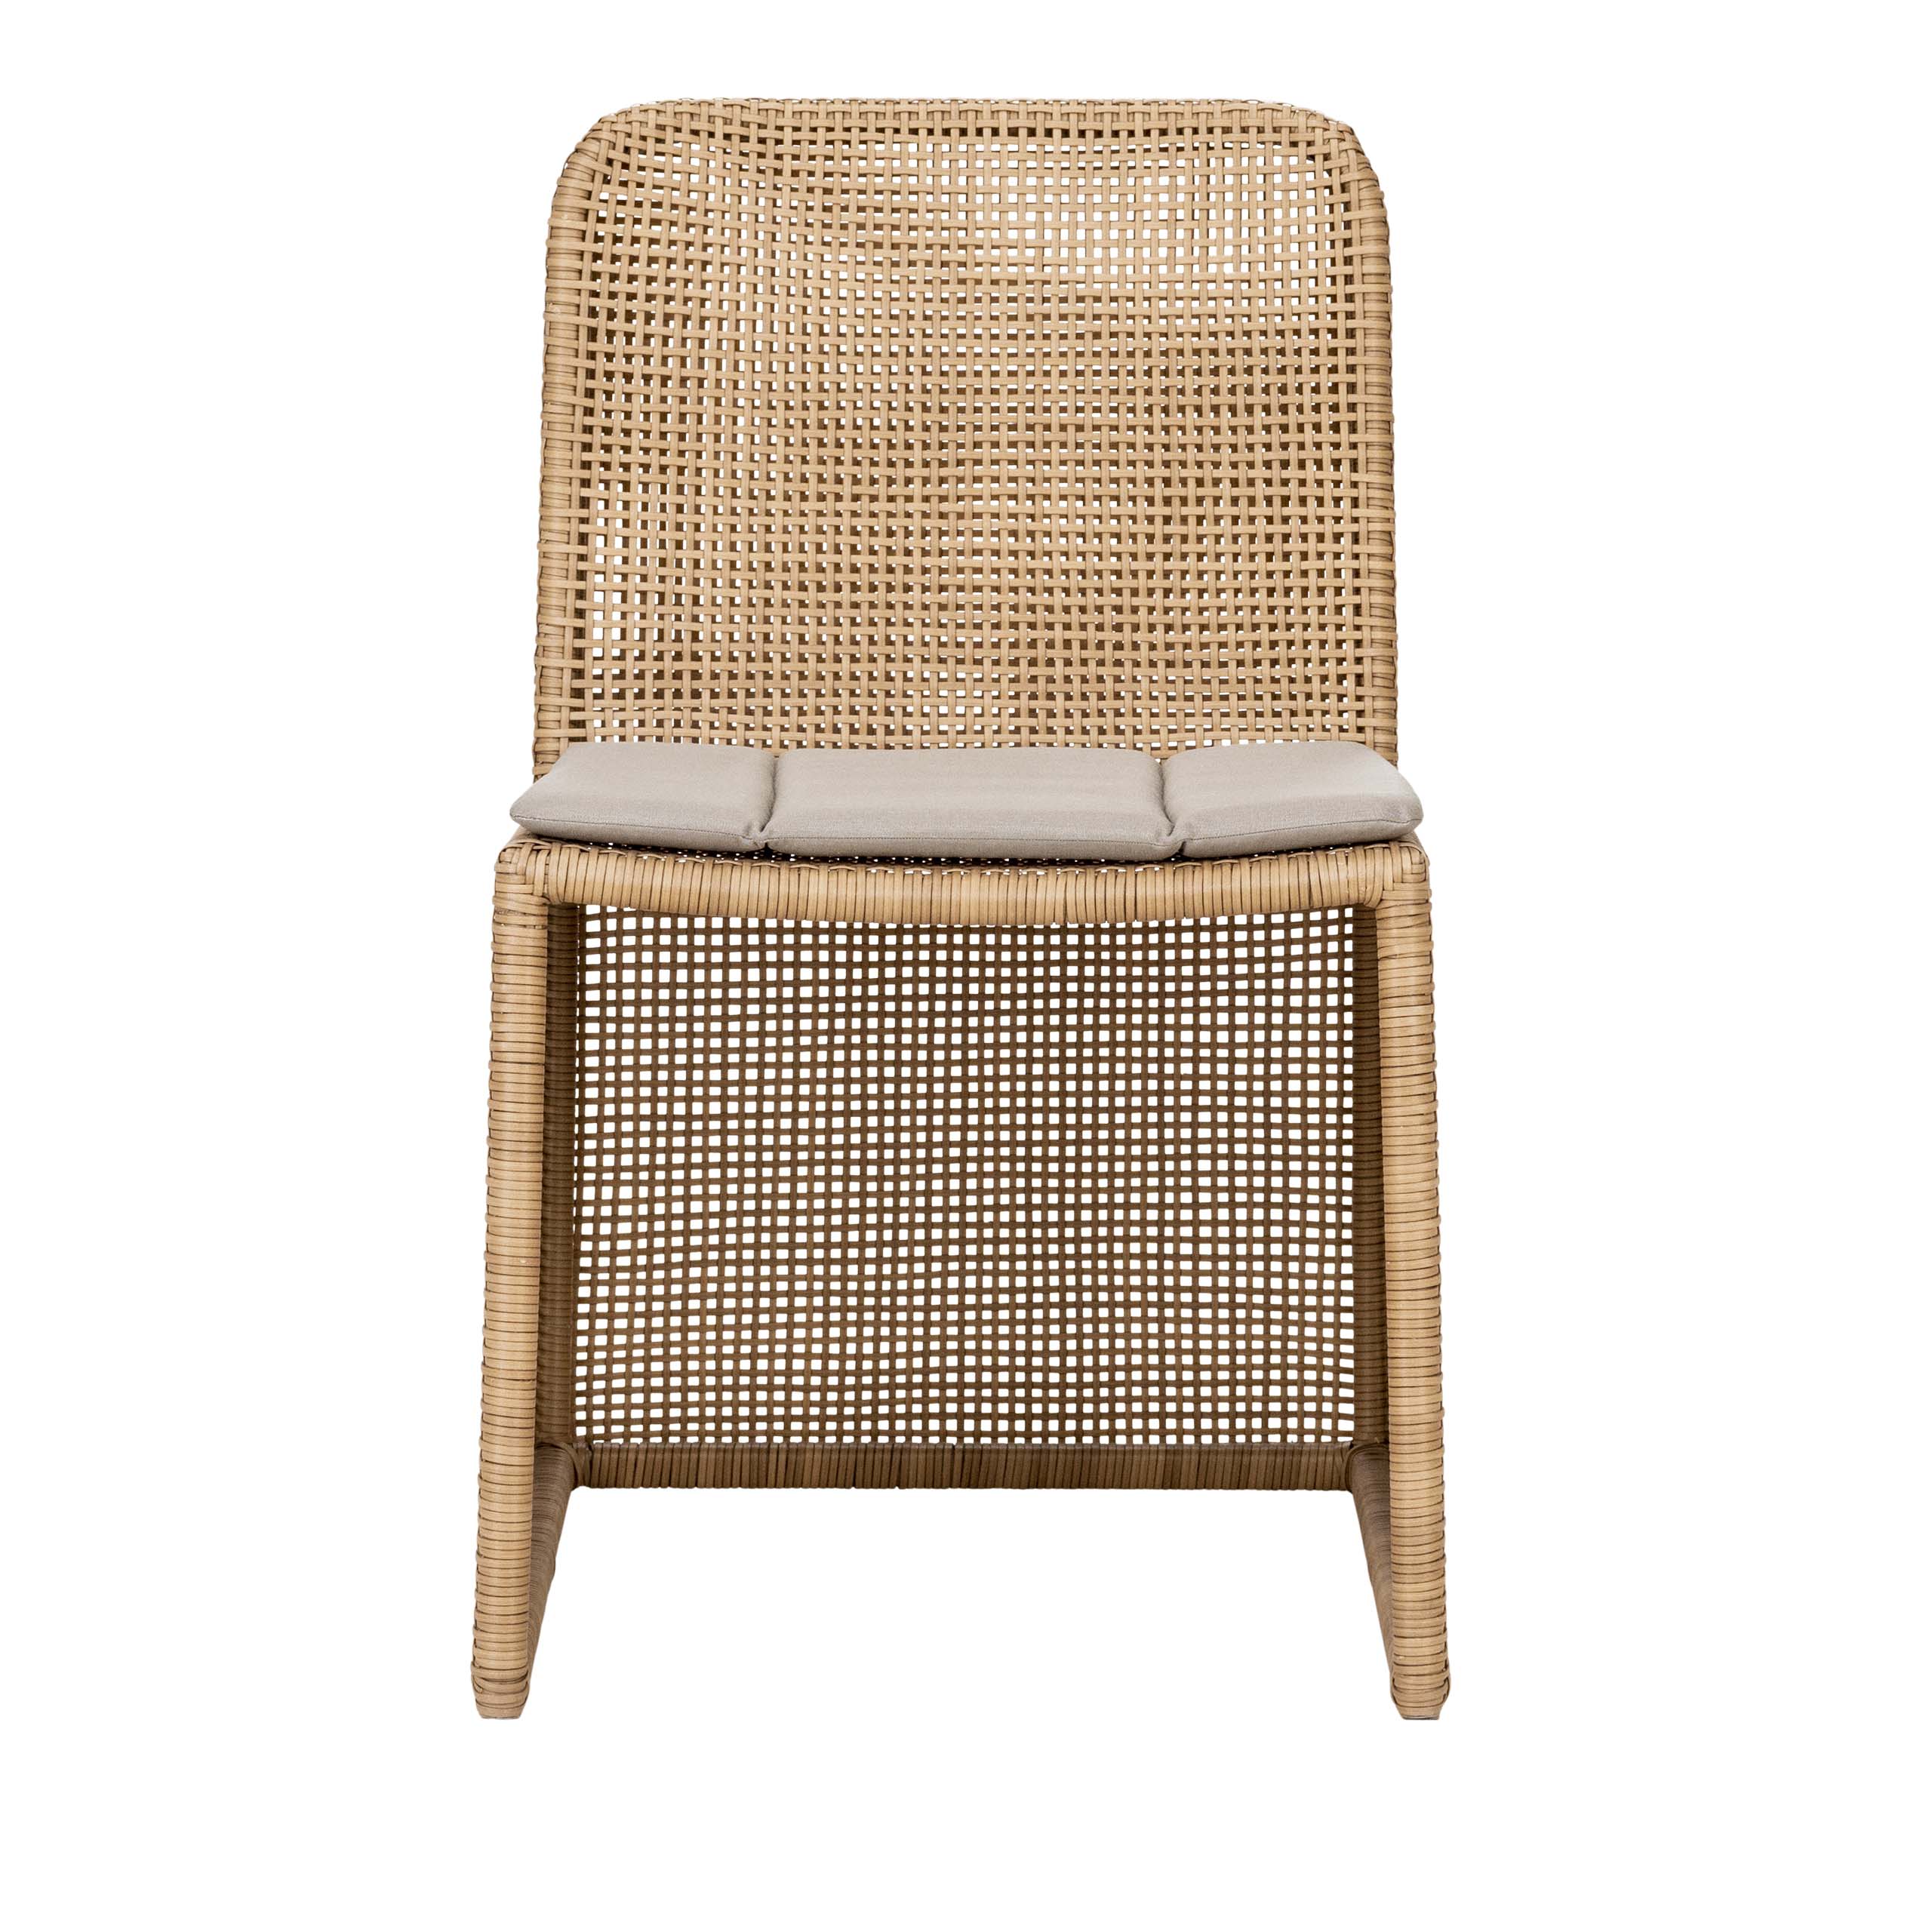 Design Warehouse - 128350 - Signature Outdoor Dining Side Chair (Natural)  - Natural